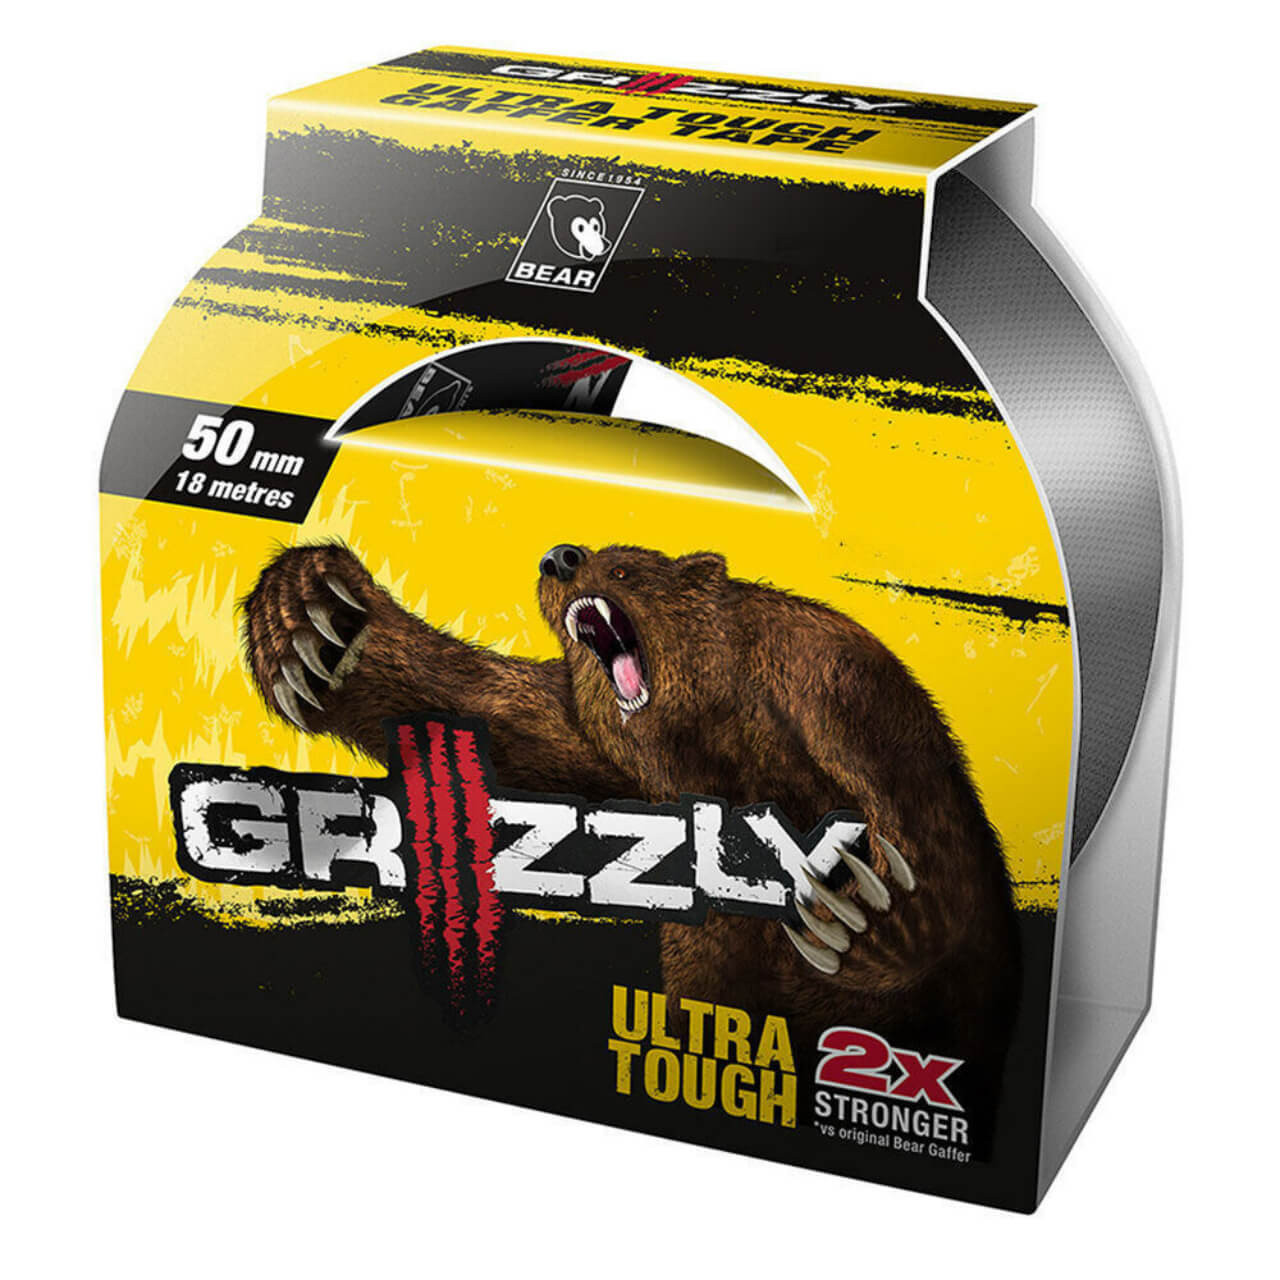 Tape Gafer Grizzly 50mmx18m- Silver